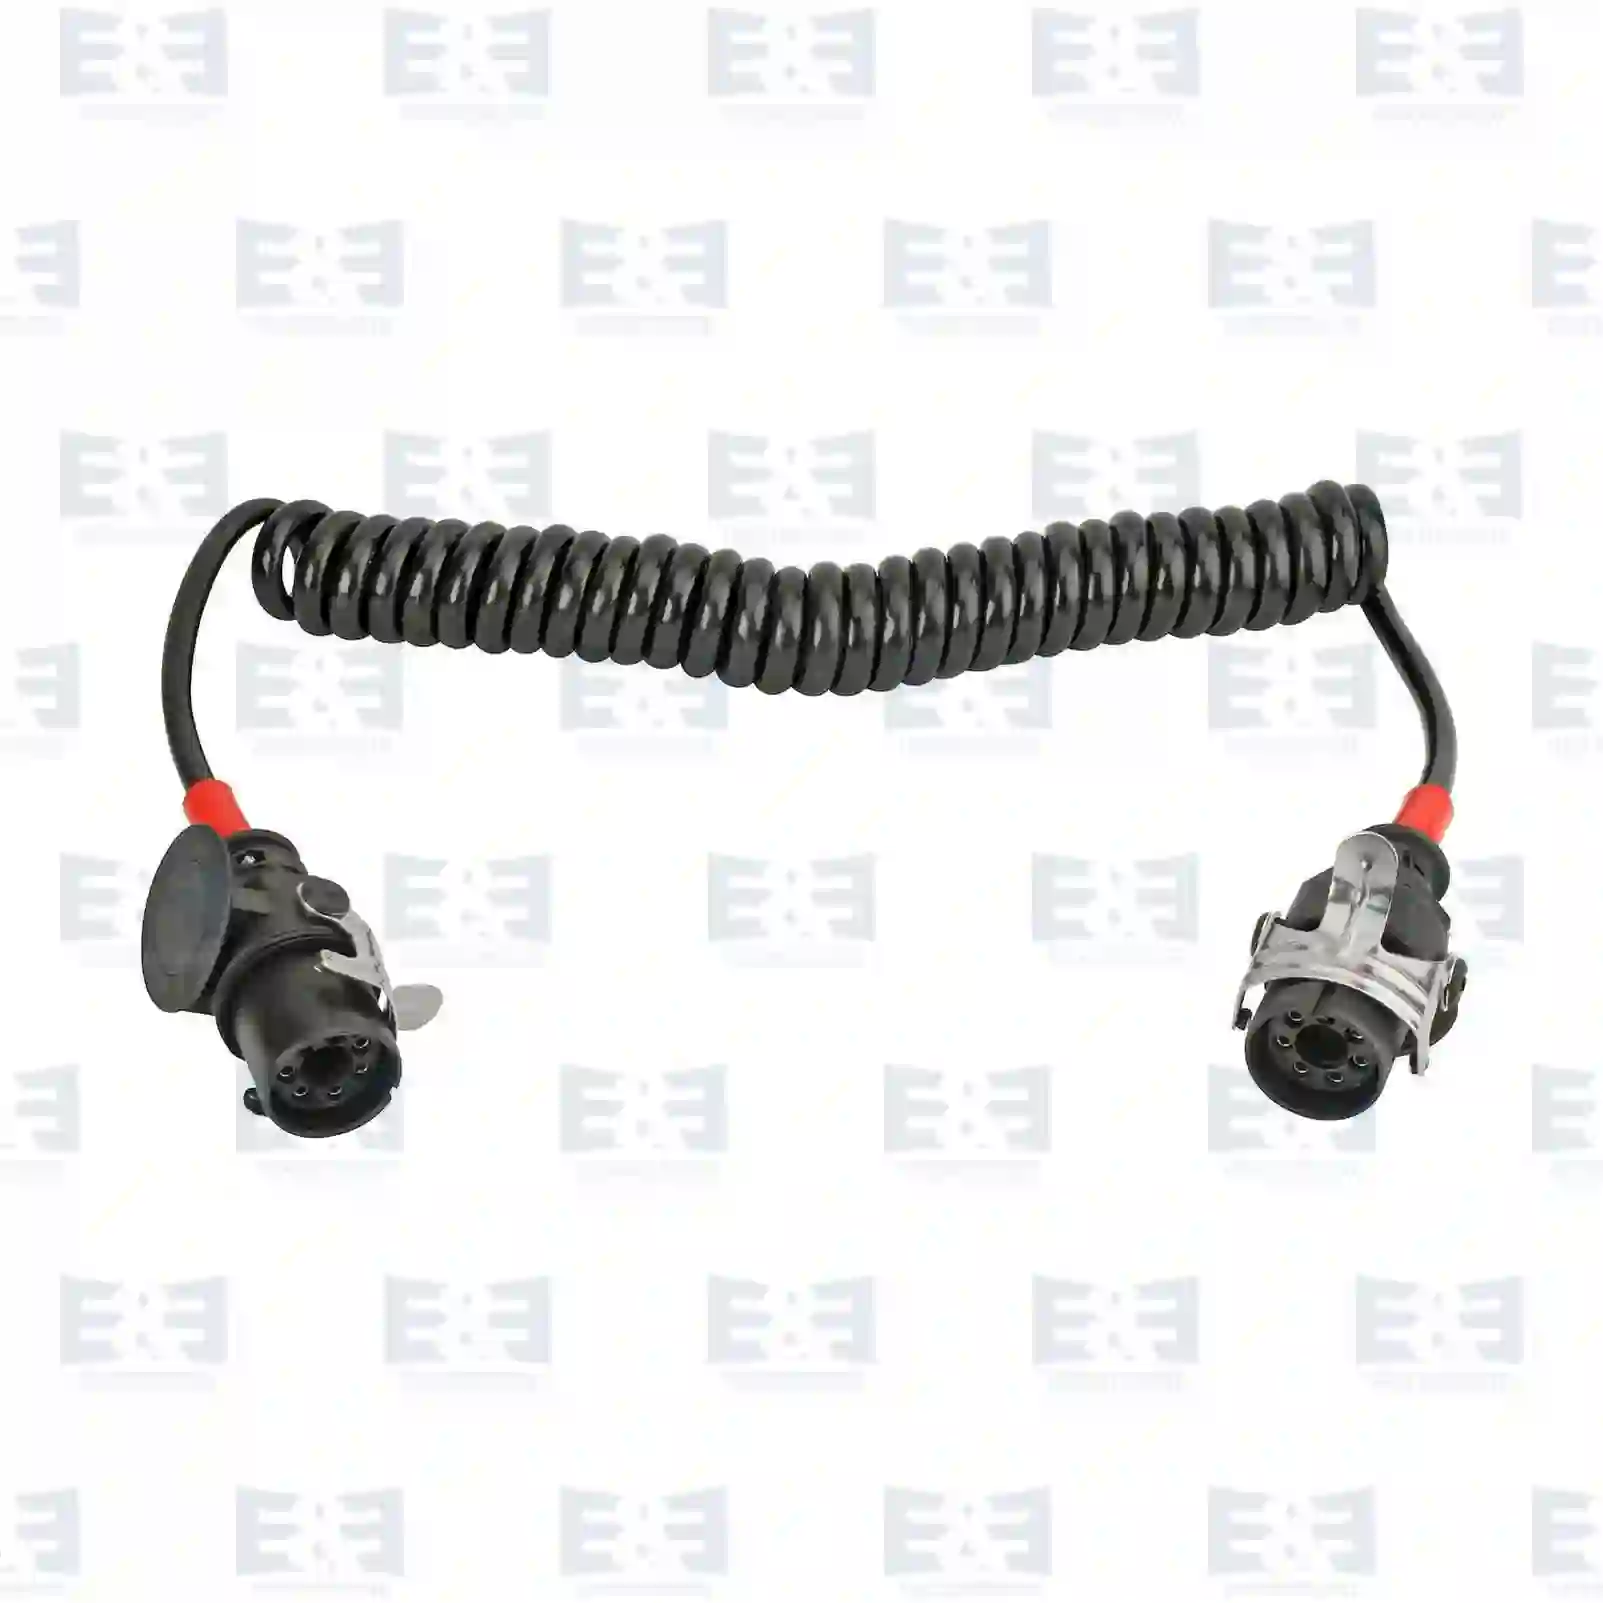 Electrical Equipment EBS cable, EE No 2E2285650 ,  oem no:1364240, 1602546, 1645493, 6611574, 81254116017, 81254116033, 81254116034, 81254116043, 81254116047, 81254116058, 82254490004, 0005403839, 5001831635, 5010480726, 5010480727, 20730341, 2V5971753 E&E Truck Spare Parts | Truck Spare Parts, Auotomotive Spare Parts